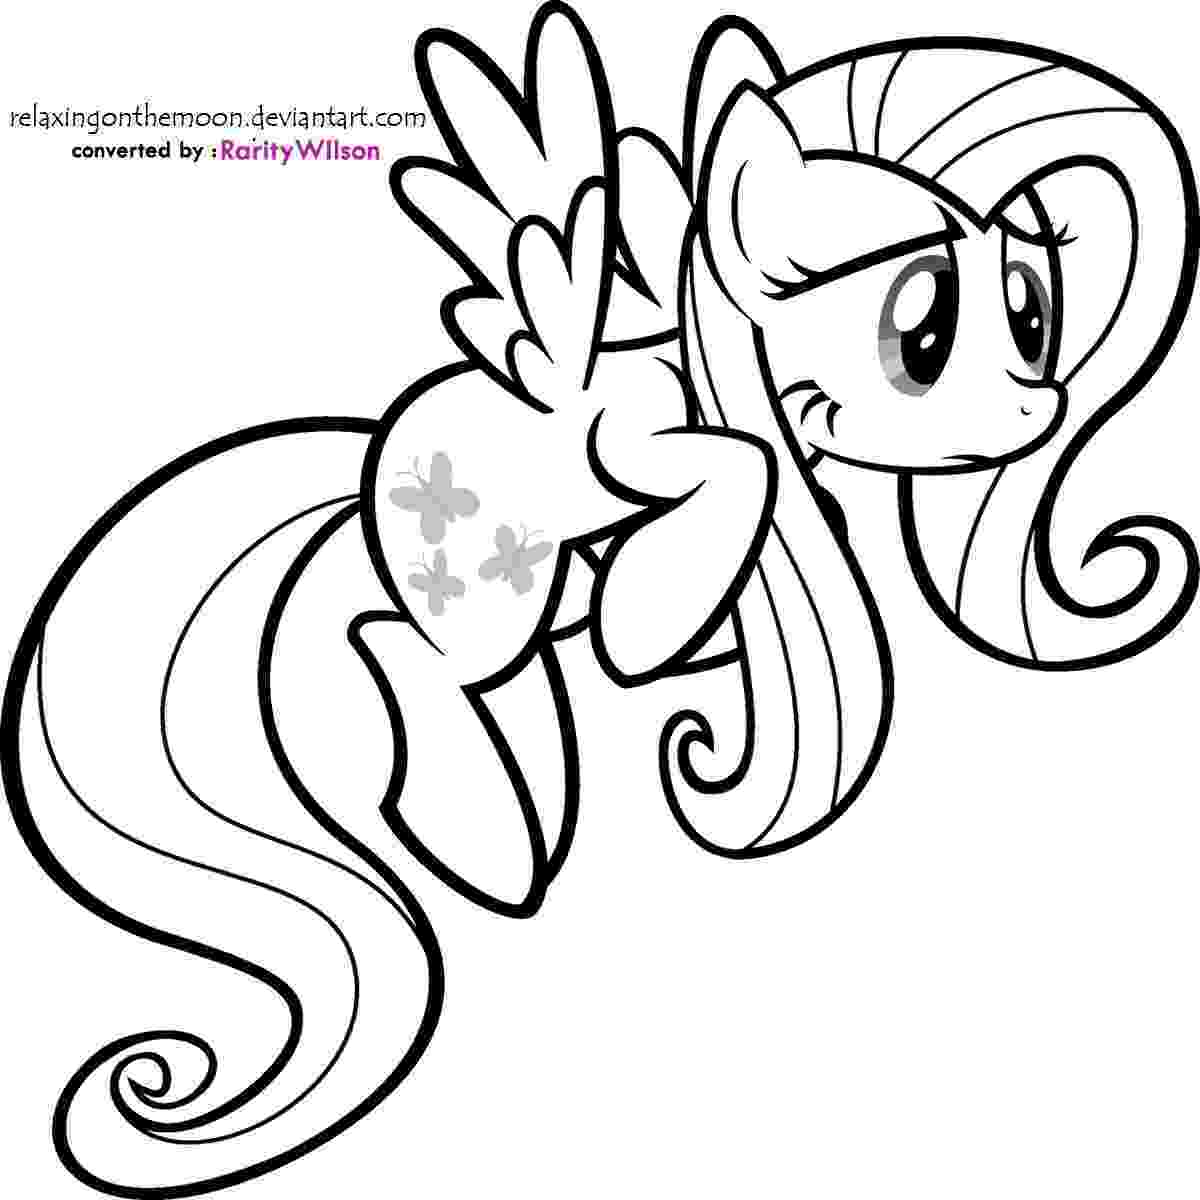 coloring pages of fluttershy fluttershy coloring pages best coloring pages for kids coloring pages of fluttershy 1 1